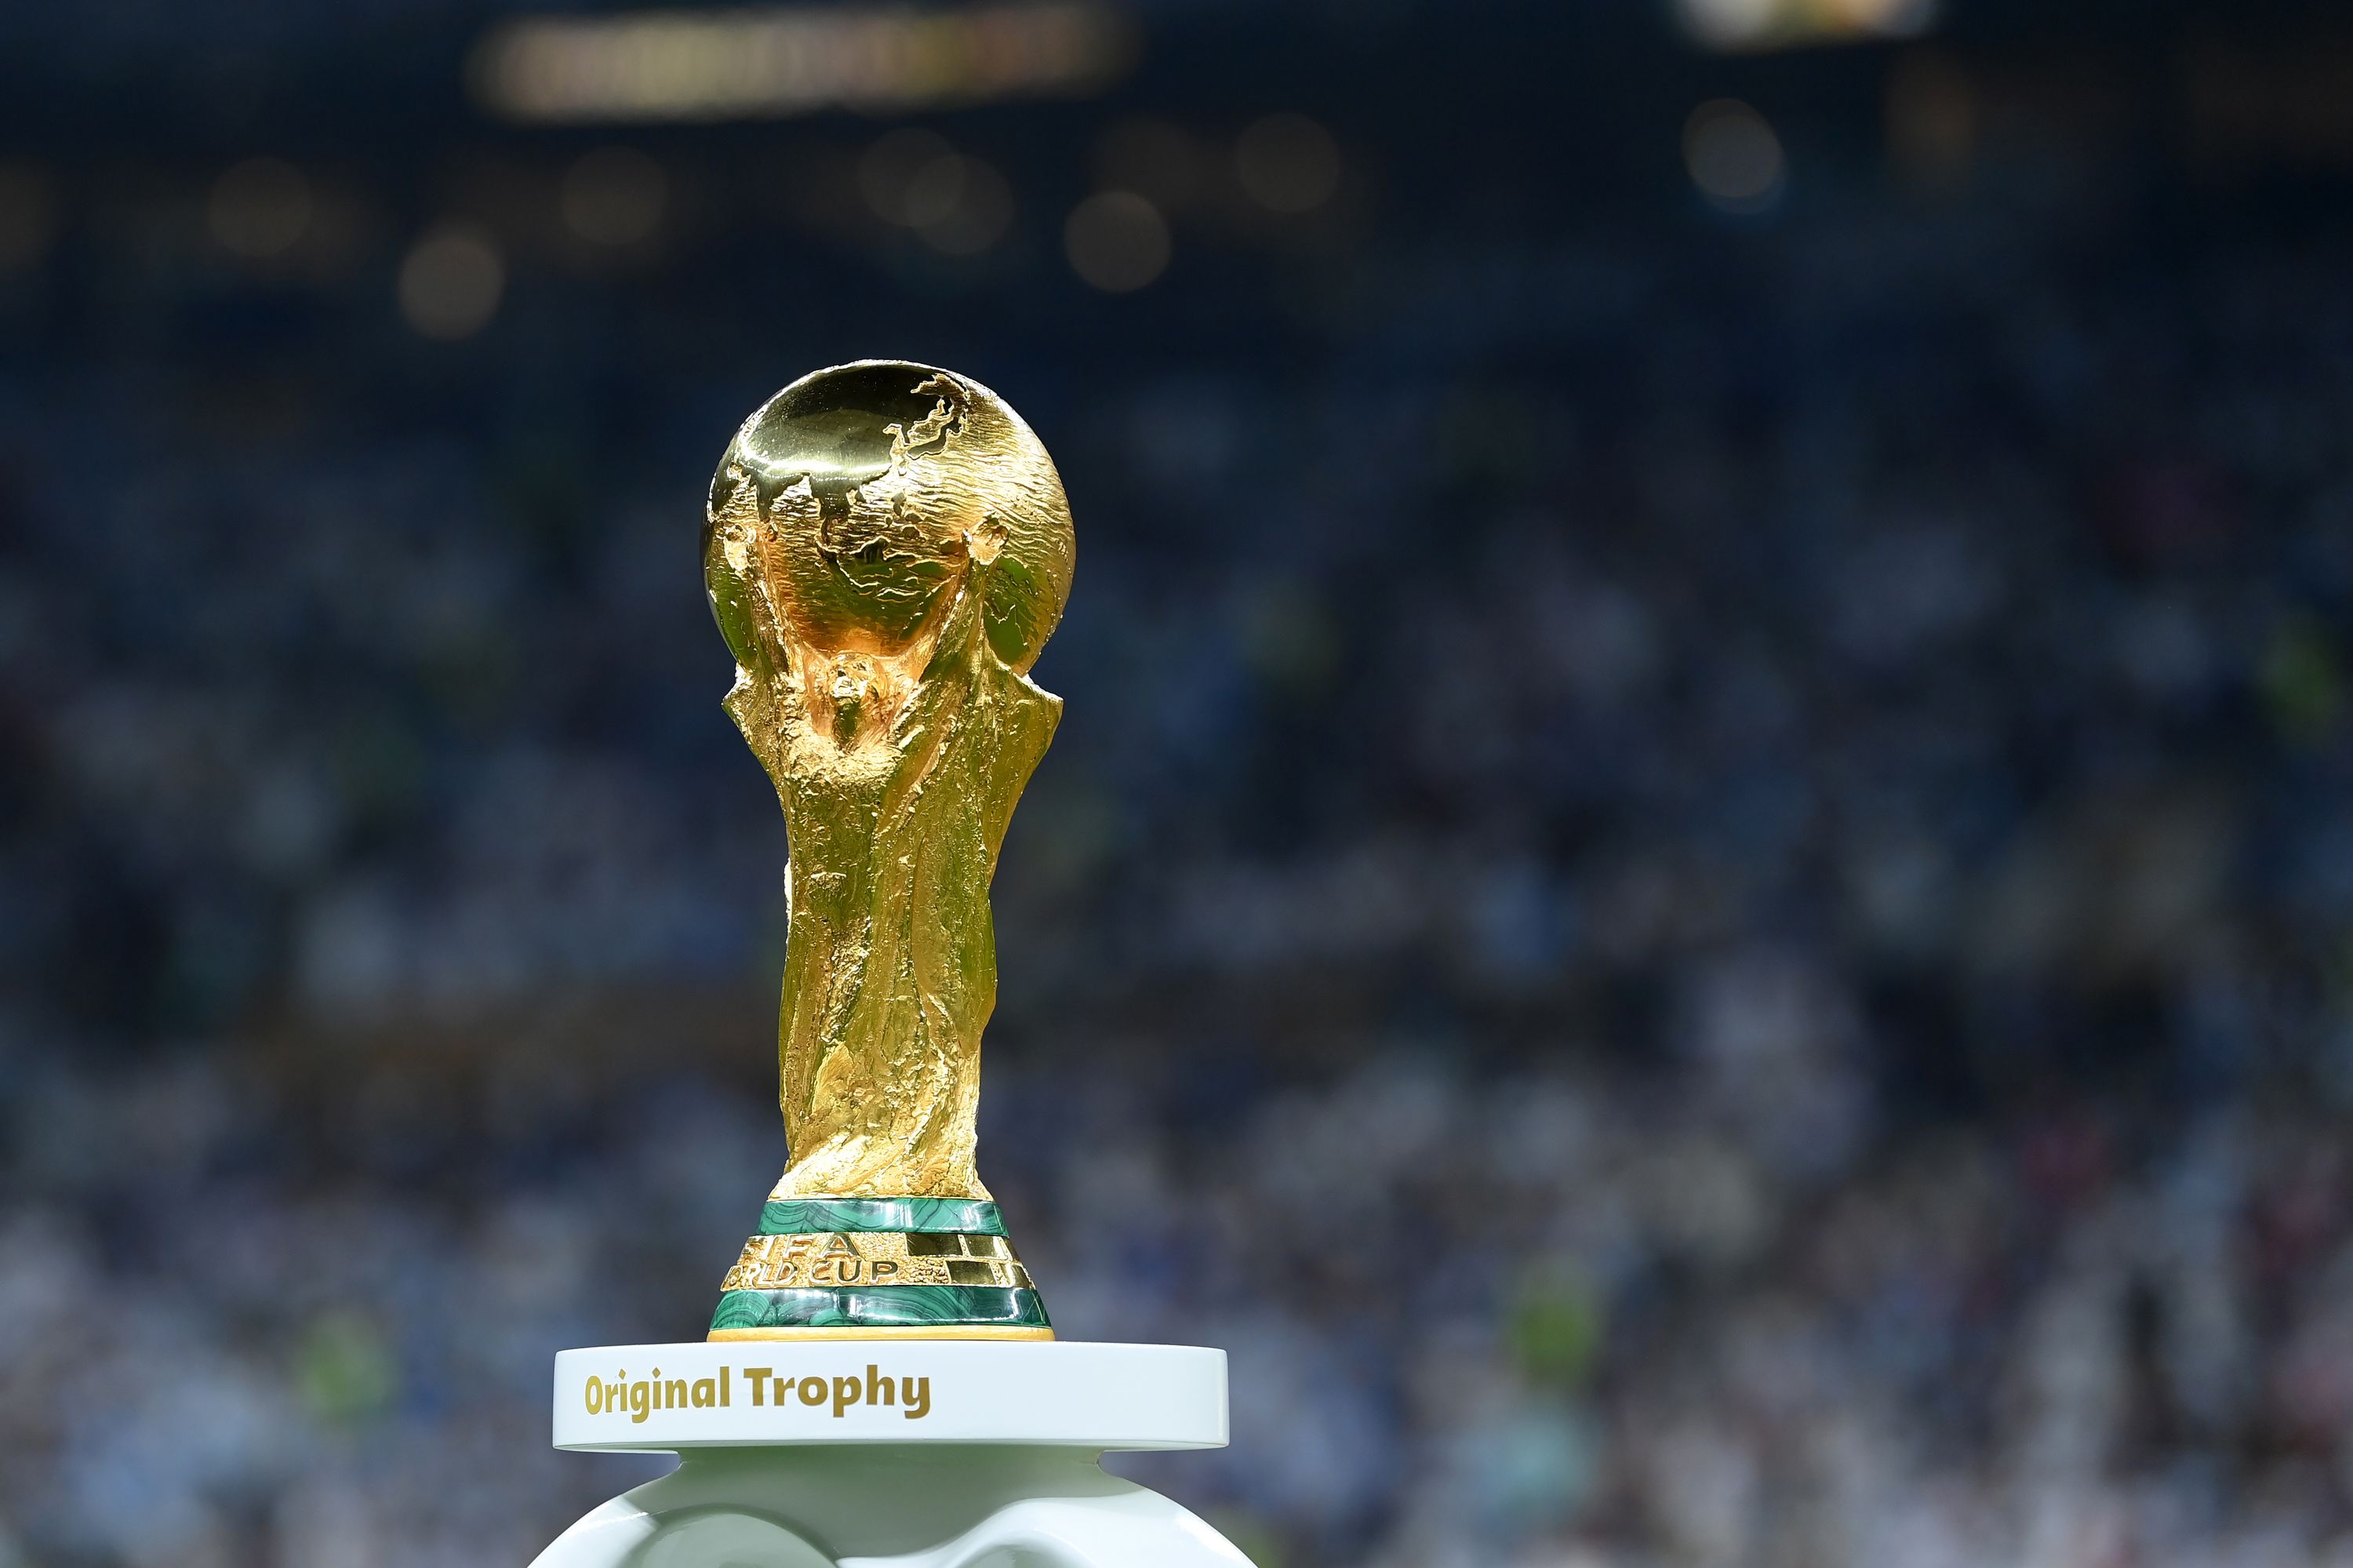 2030 FIFA World Cup set to be hosted by Spain, Portugal, Morocco